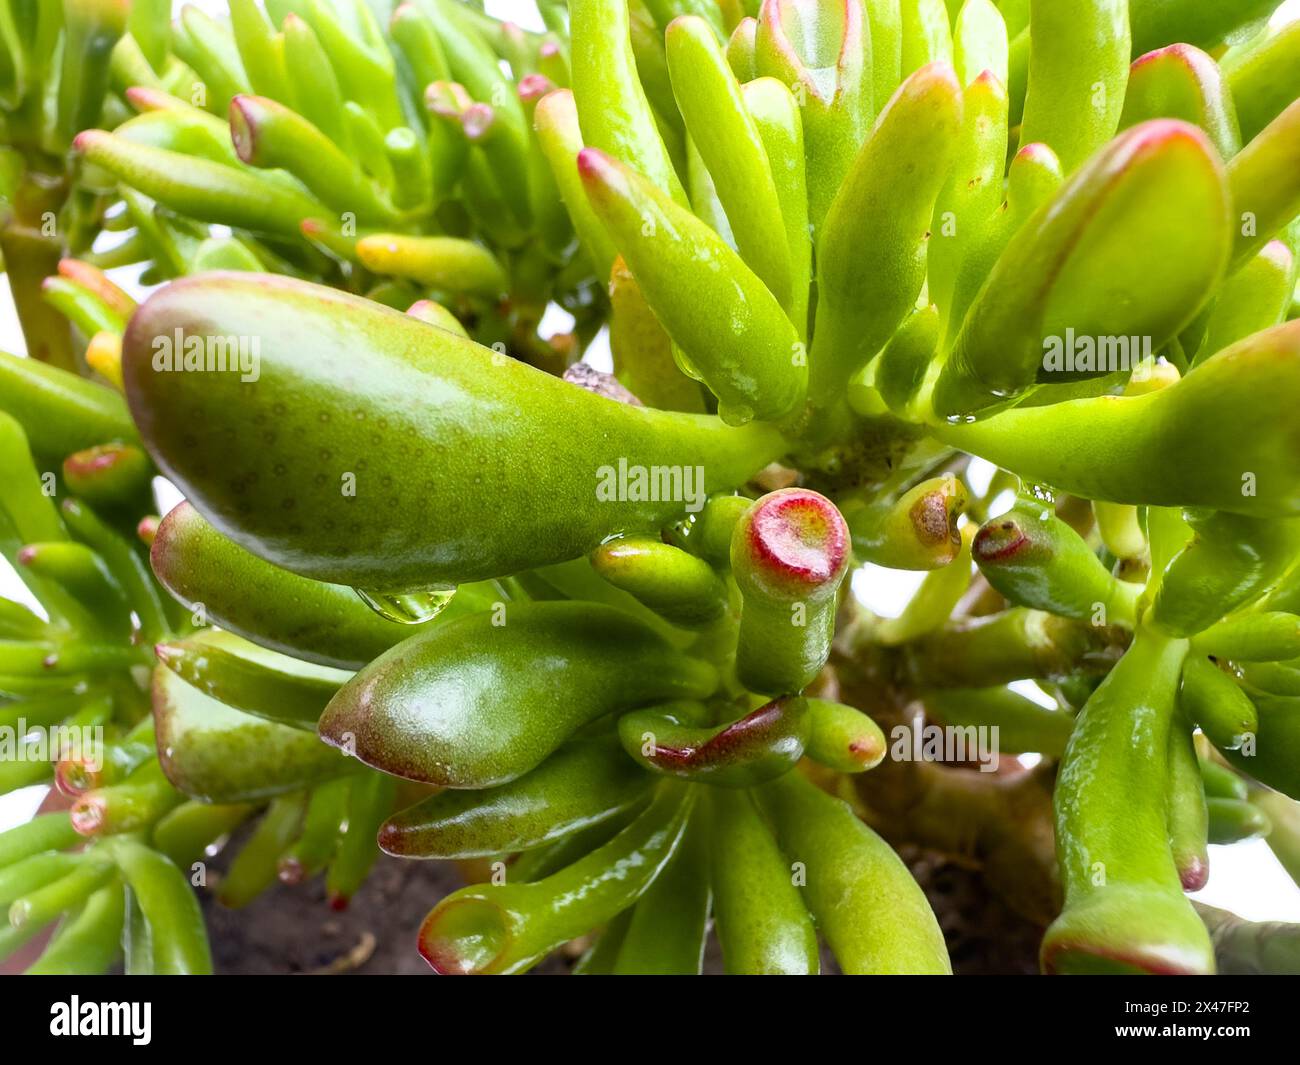 Crassula ovata Gollum Crassula ovata gollum succulent with tubular, trumpet shaped leaves and red tops closeup view Stock Photo